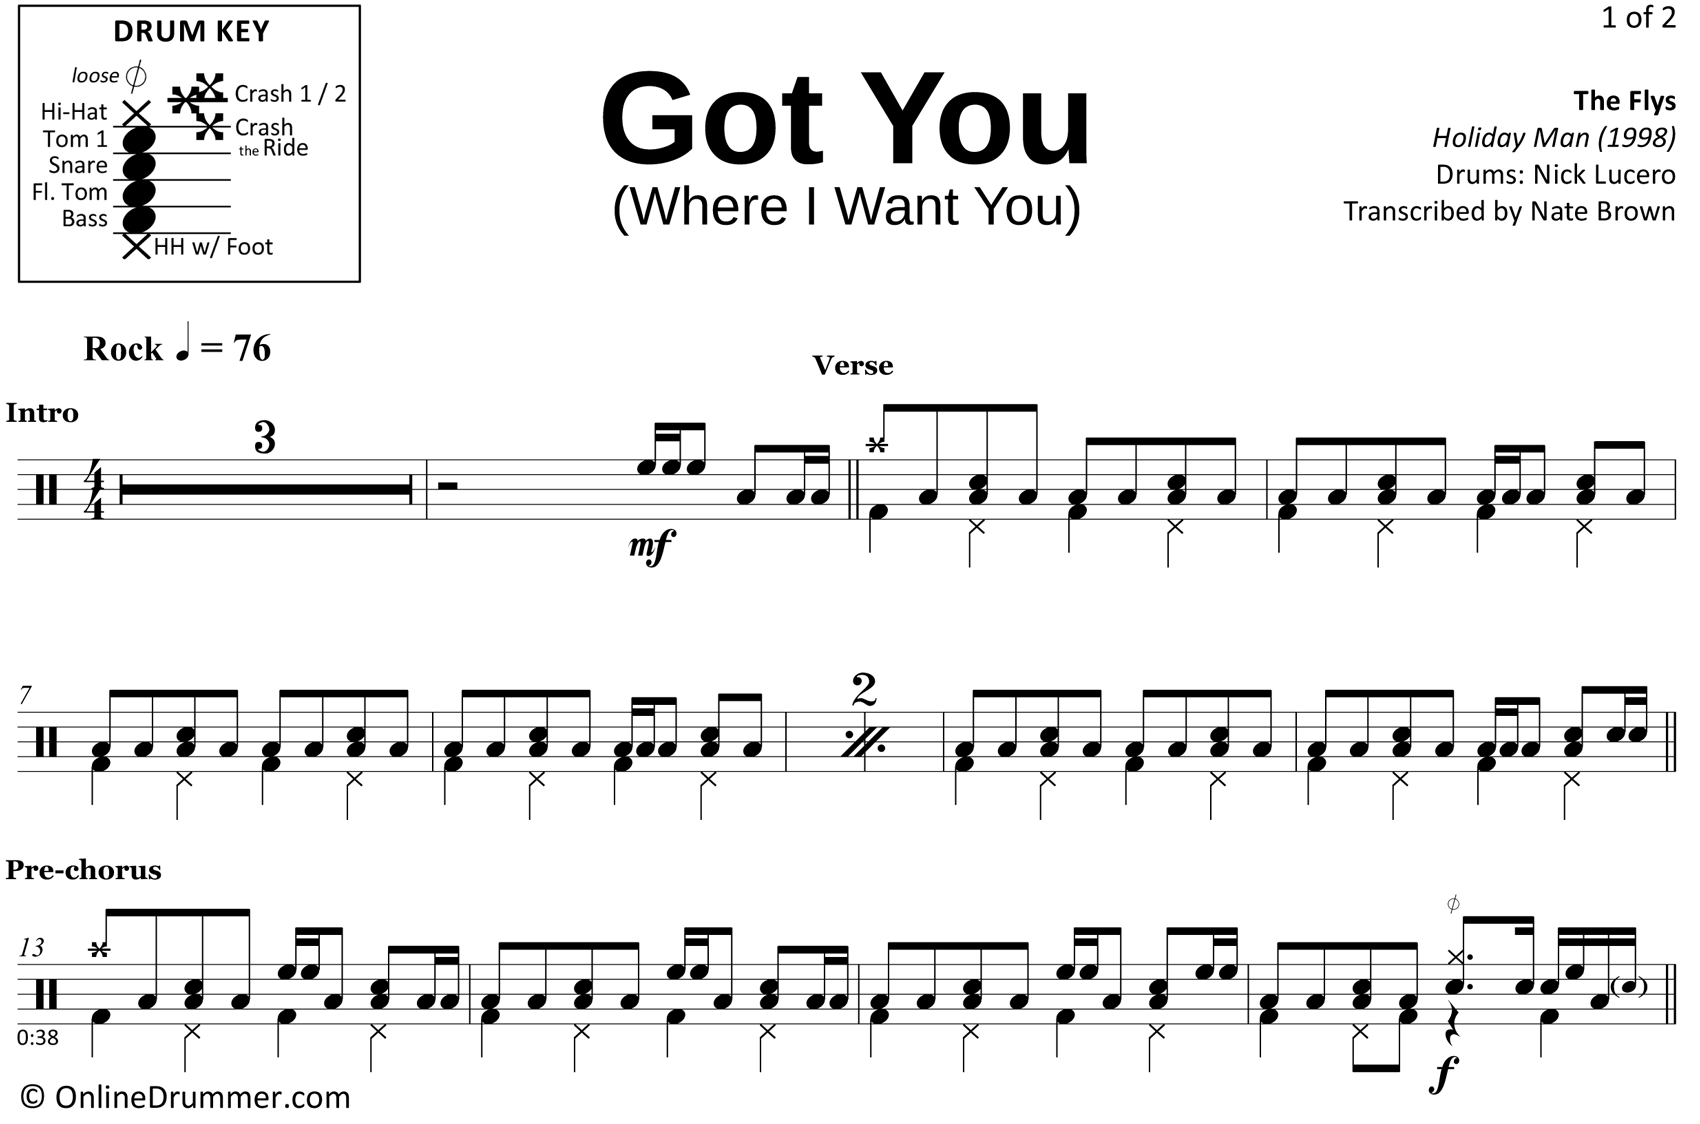 Got You (Where I Want You) - The Flys - Drum Sheet Music